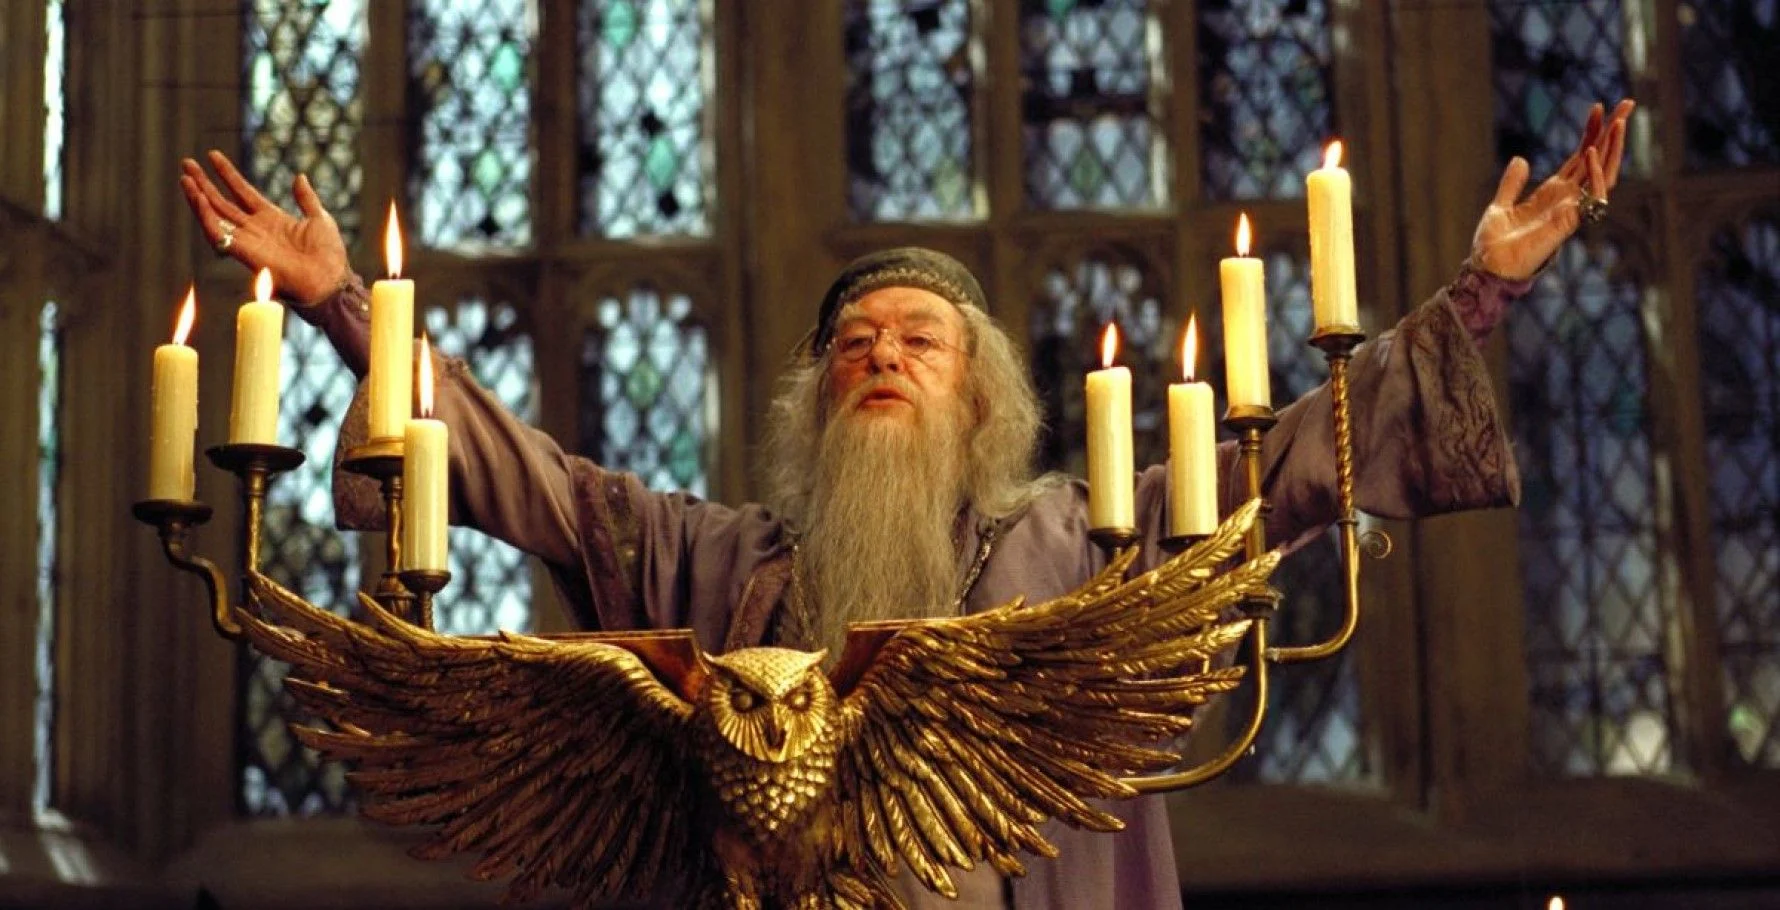 When he was a student at Hogwarts, Dumbledore belonged to Gryffindor.